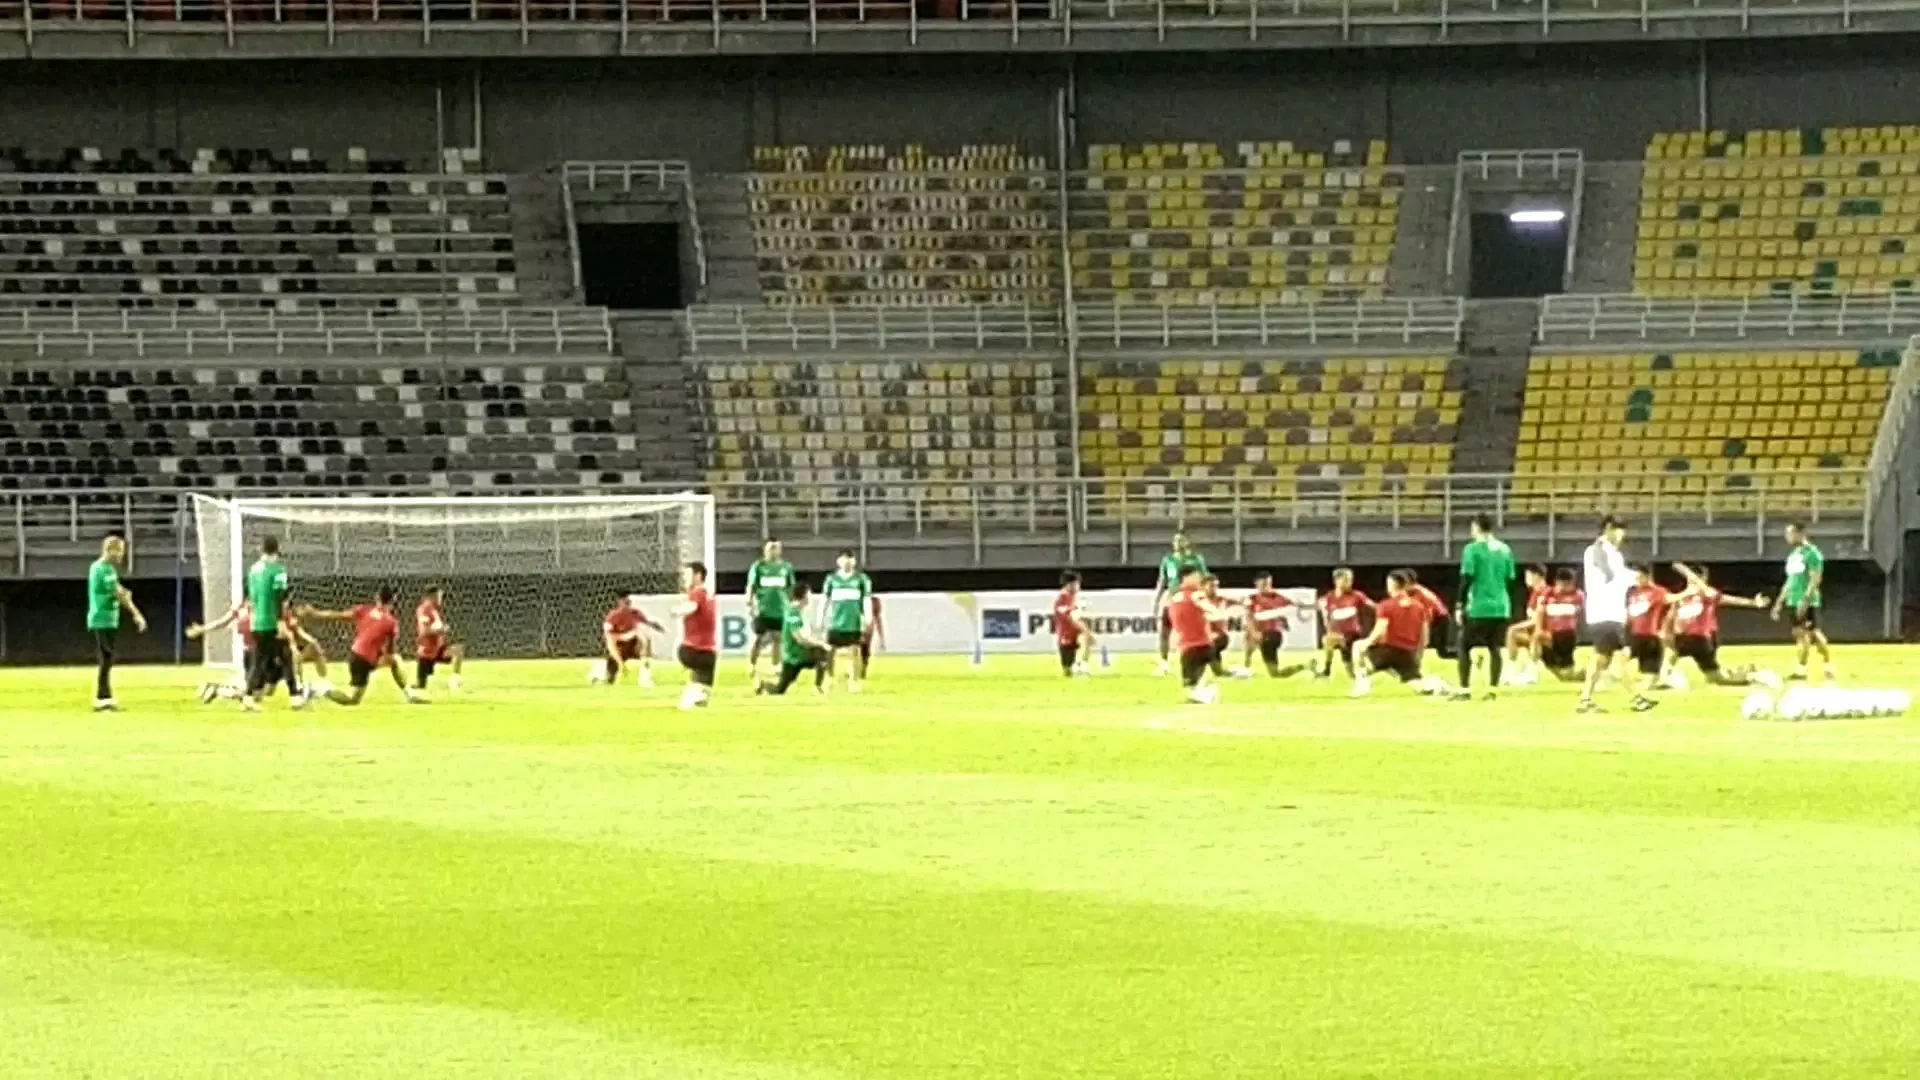 Indonesia vs Palestine: 40,000 Spectators Will Crowded GBT, 4,500 Security Forces Ready